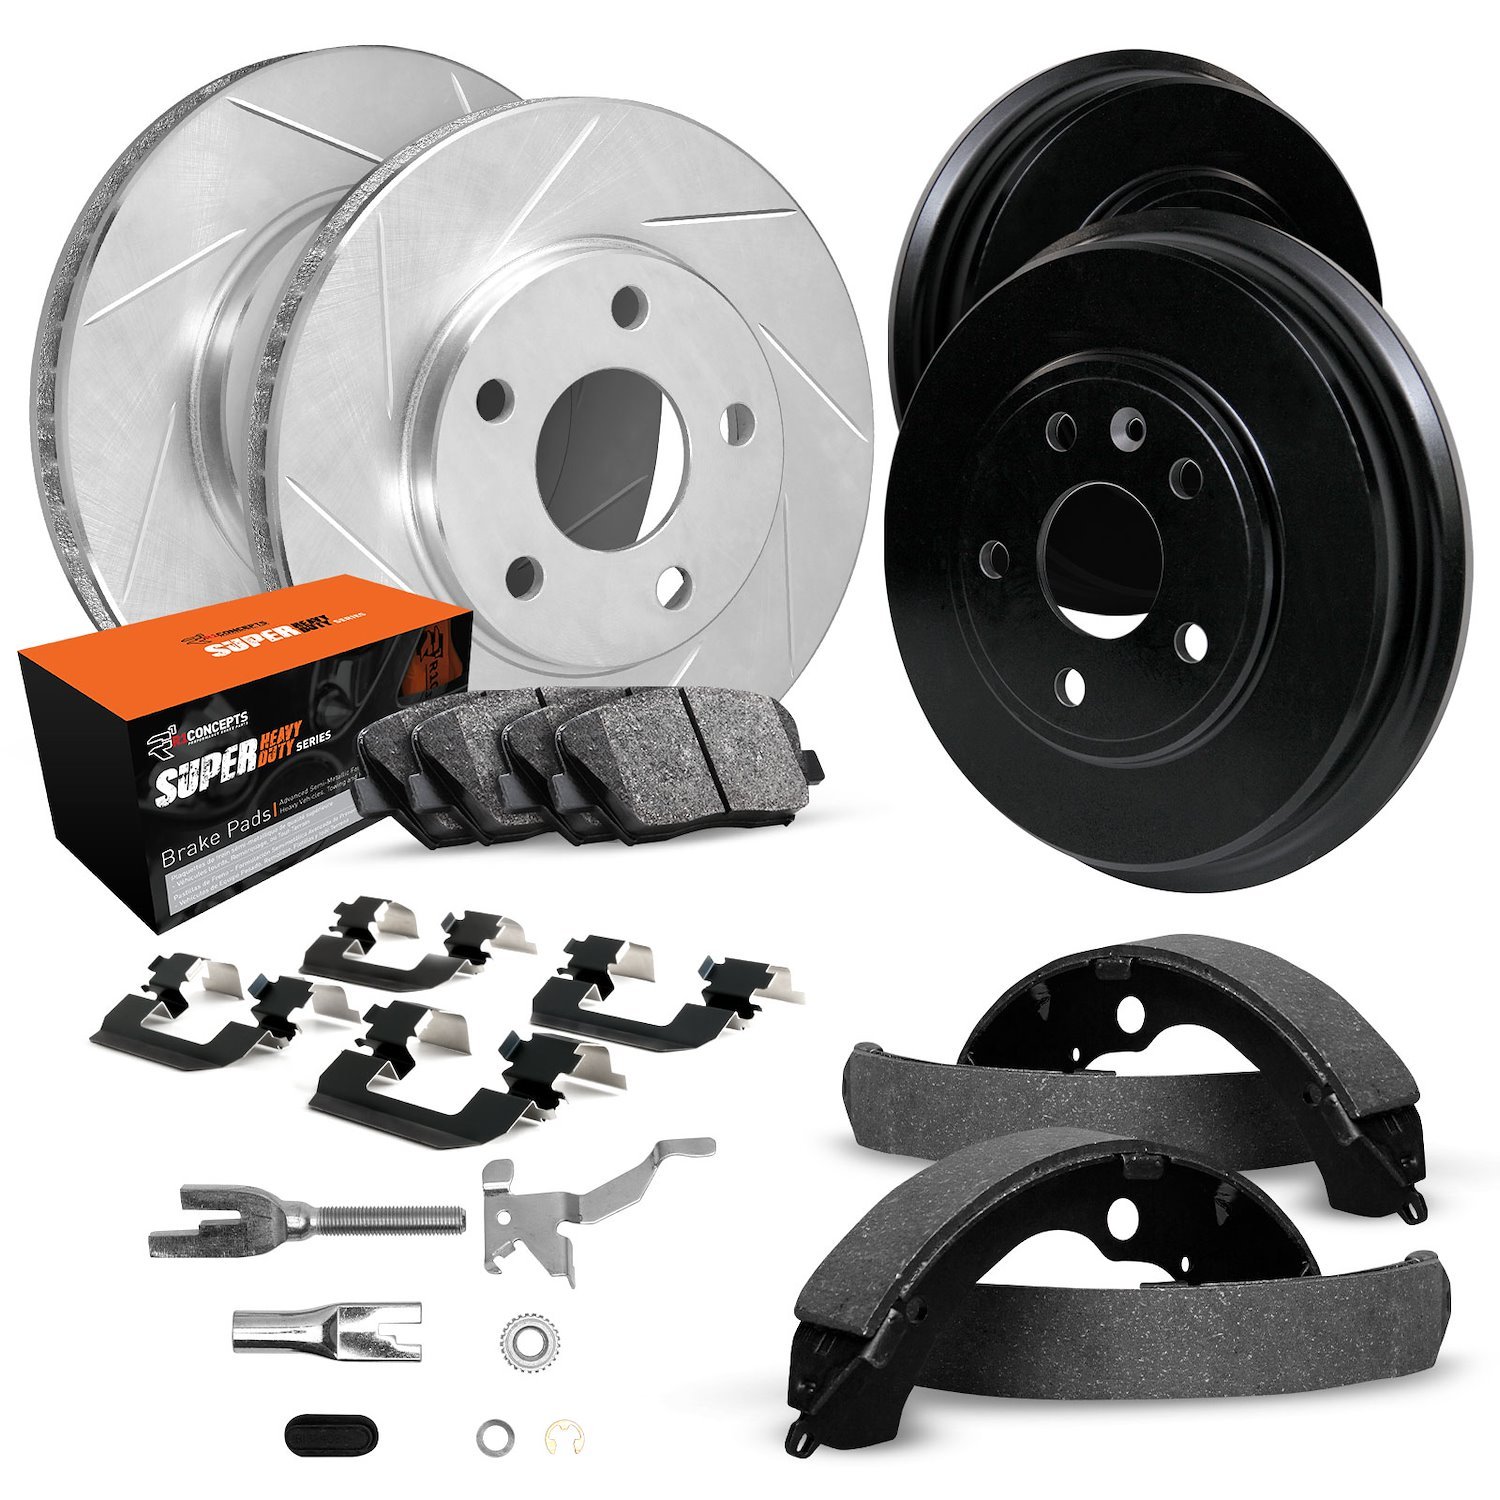 E-Line Slotted Silver Rotor & Drum Set w/Super-Duty Pads, Shoes/Hardware/Adjusters, 1998-2002 Ford/Lincoln/Mercury/Mazda